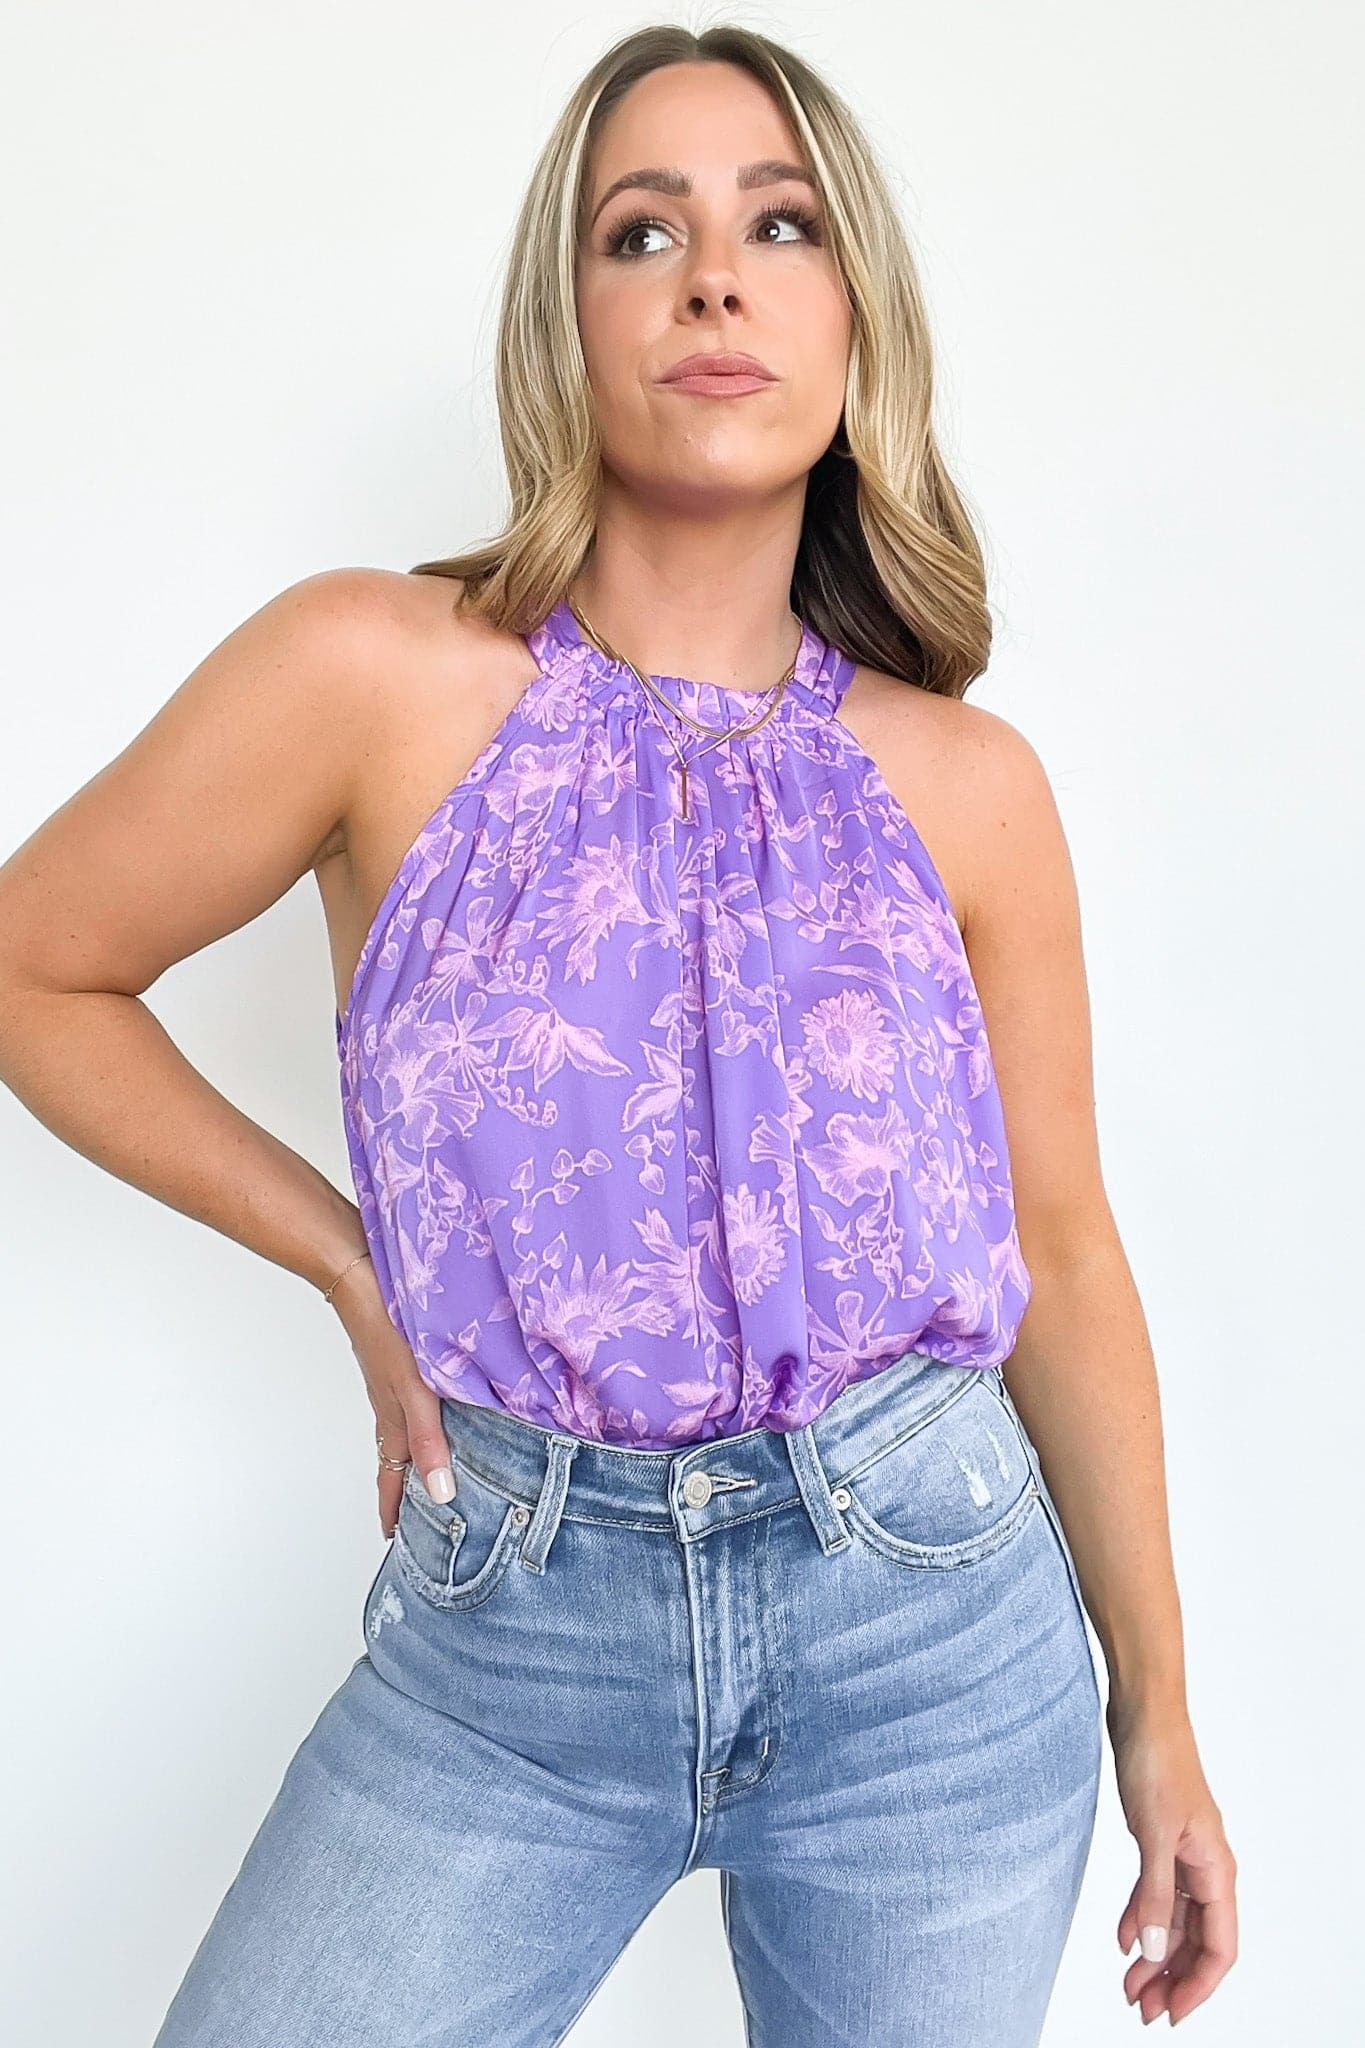  Whimsical Wishes Floral Smocked Top - FINAL SALE - Madison and Mallory